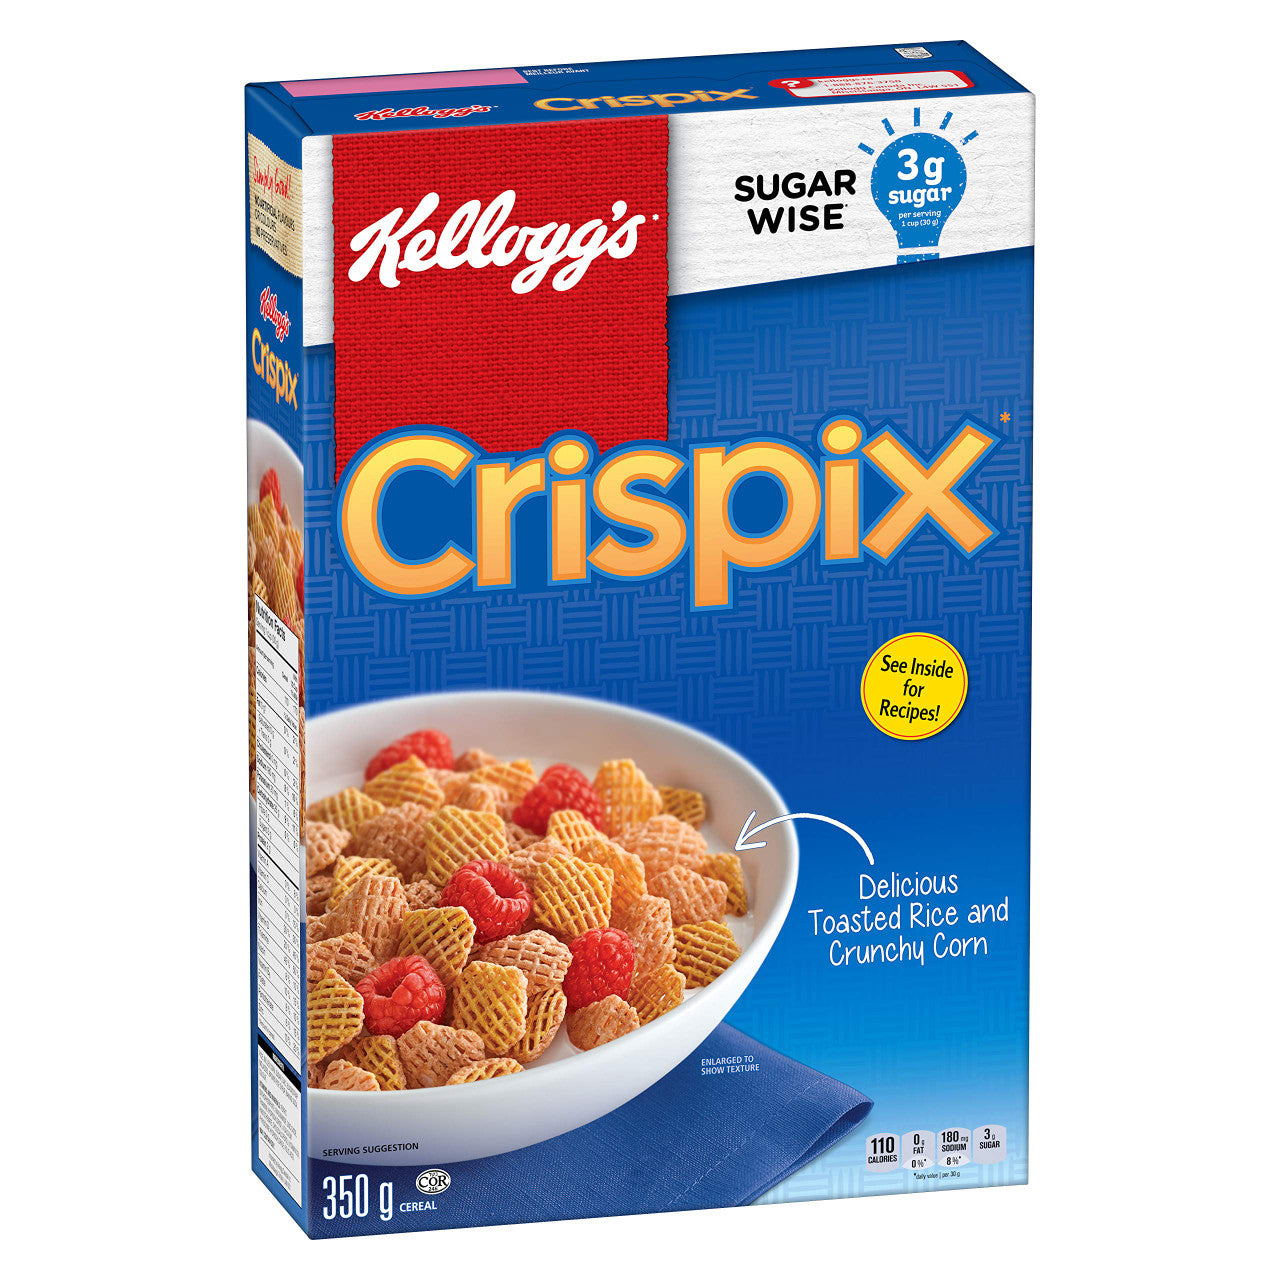 Kellogg's Crispix Krispies Cereal, 350g/12oz, (Imported from Canada)